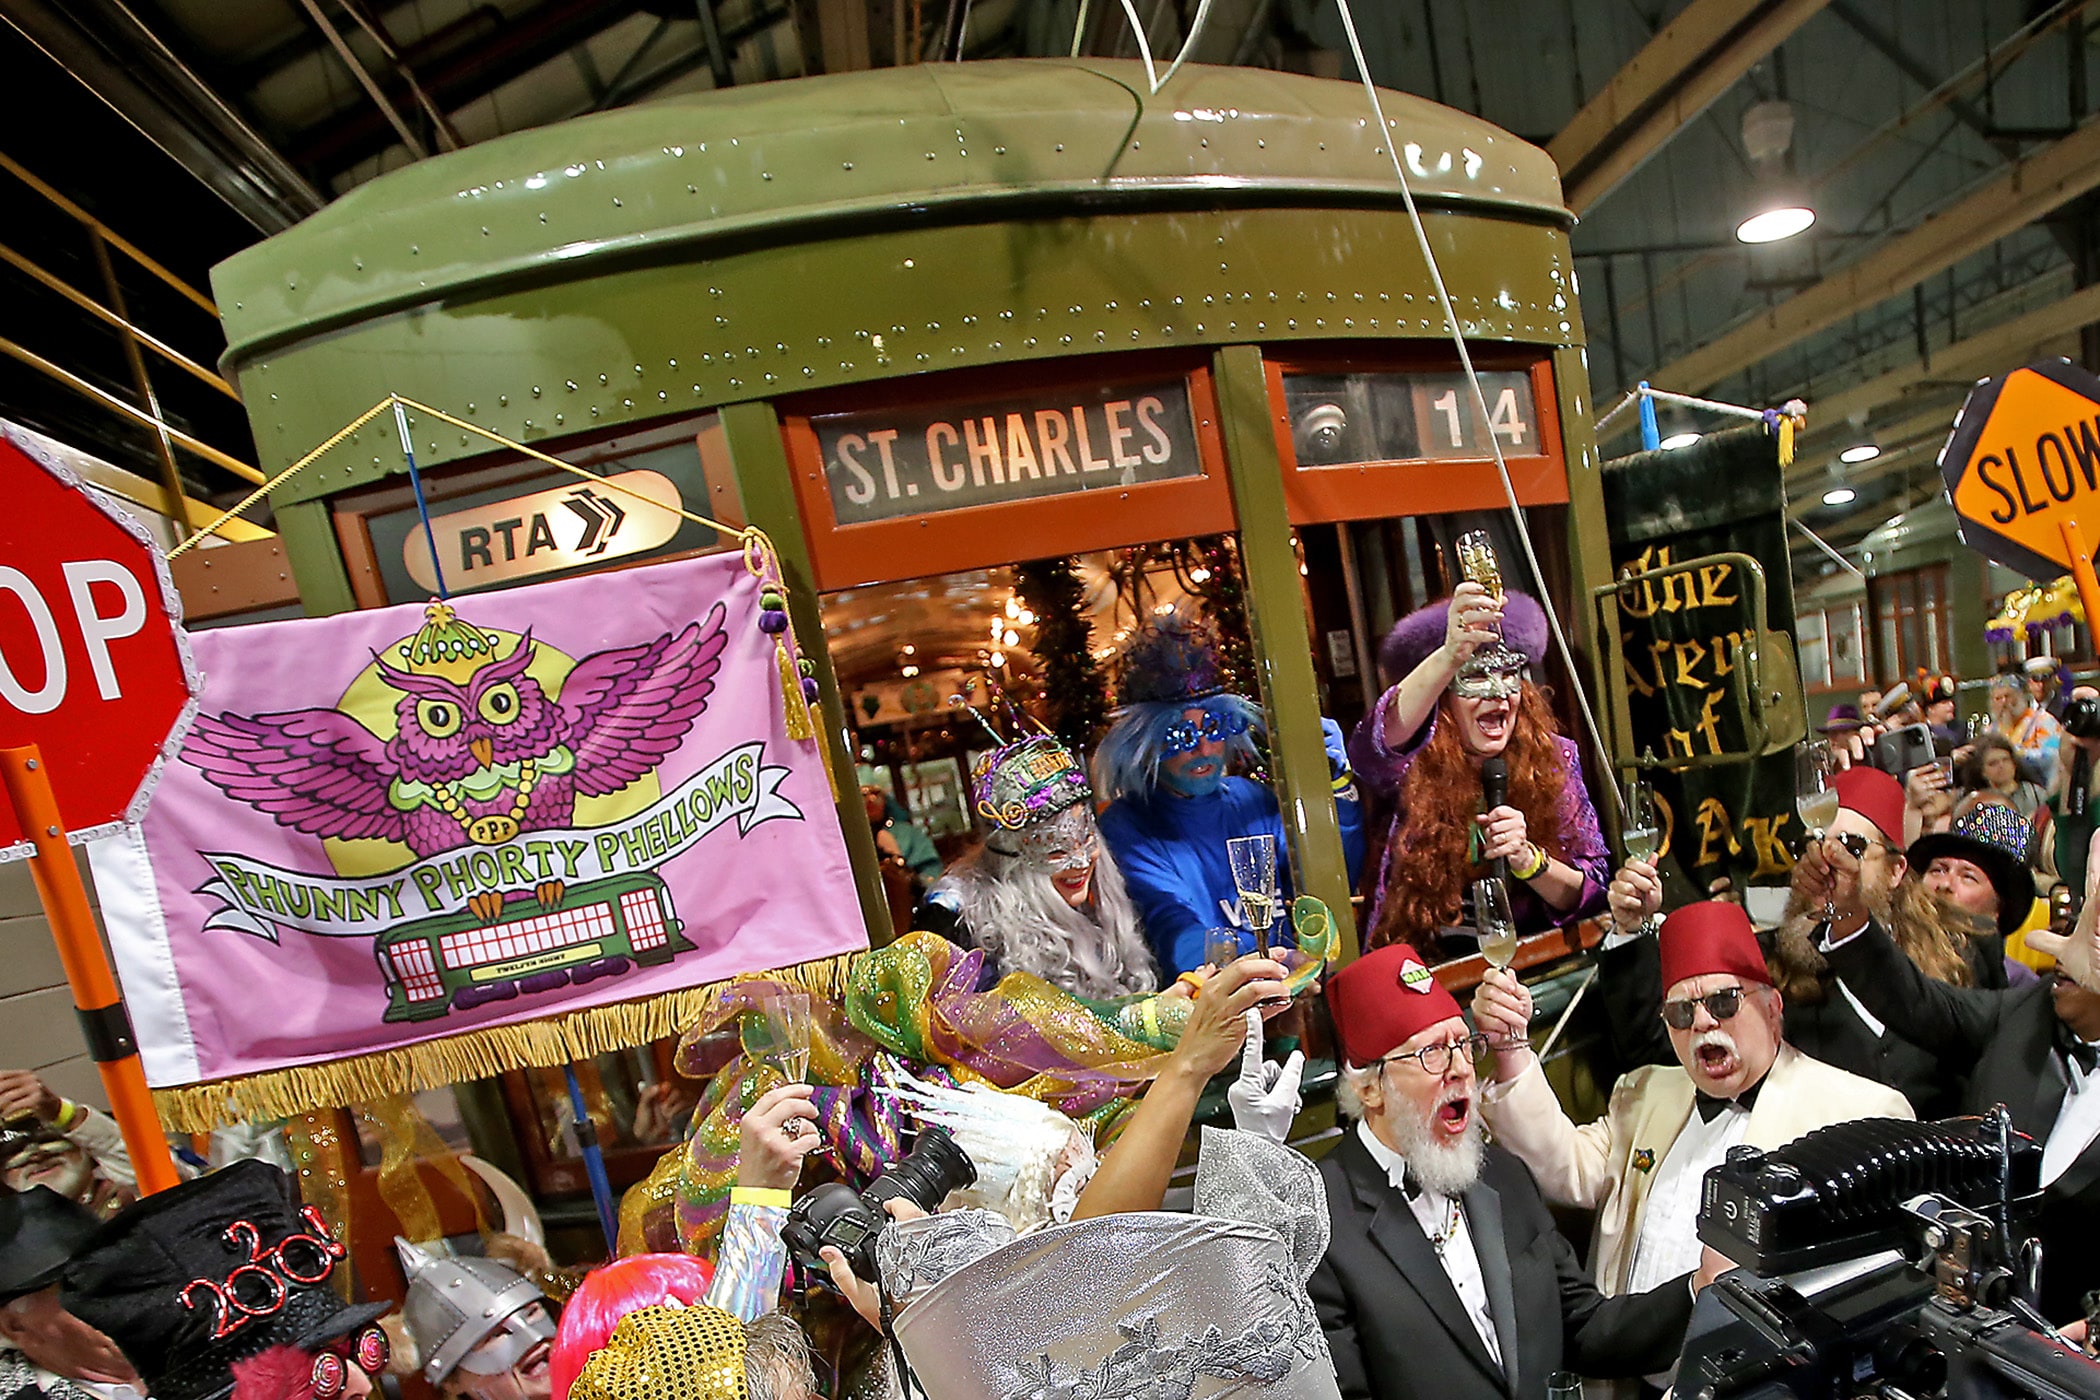 The men and women of the Phunny Phorty Phellows embark on their traditional Twelfth Night streetcar ride, leaving from the Willow Street car barn and riding the tracks through New Orleans to herald the start of Carnival season on Monday, January 6, 2020.